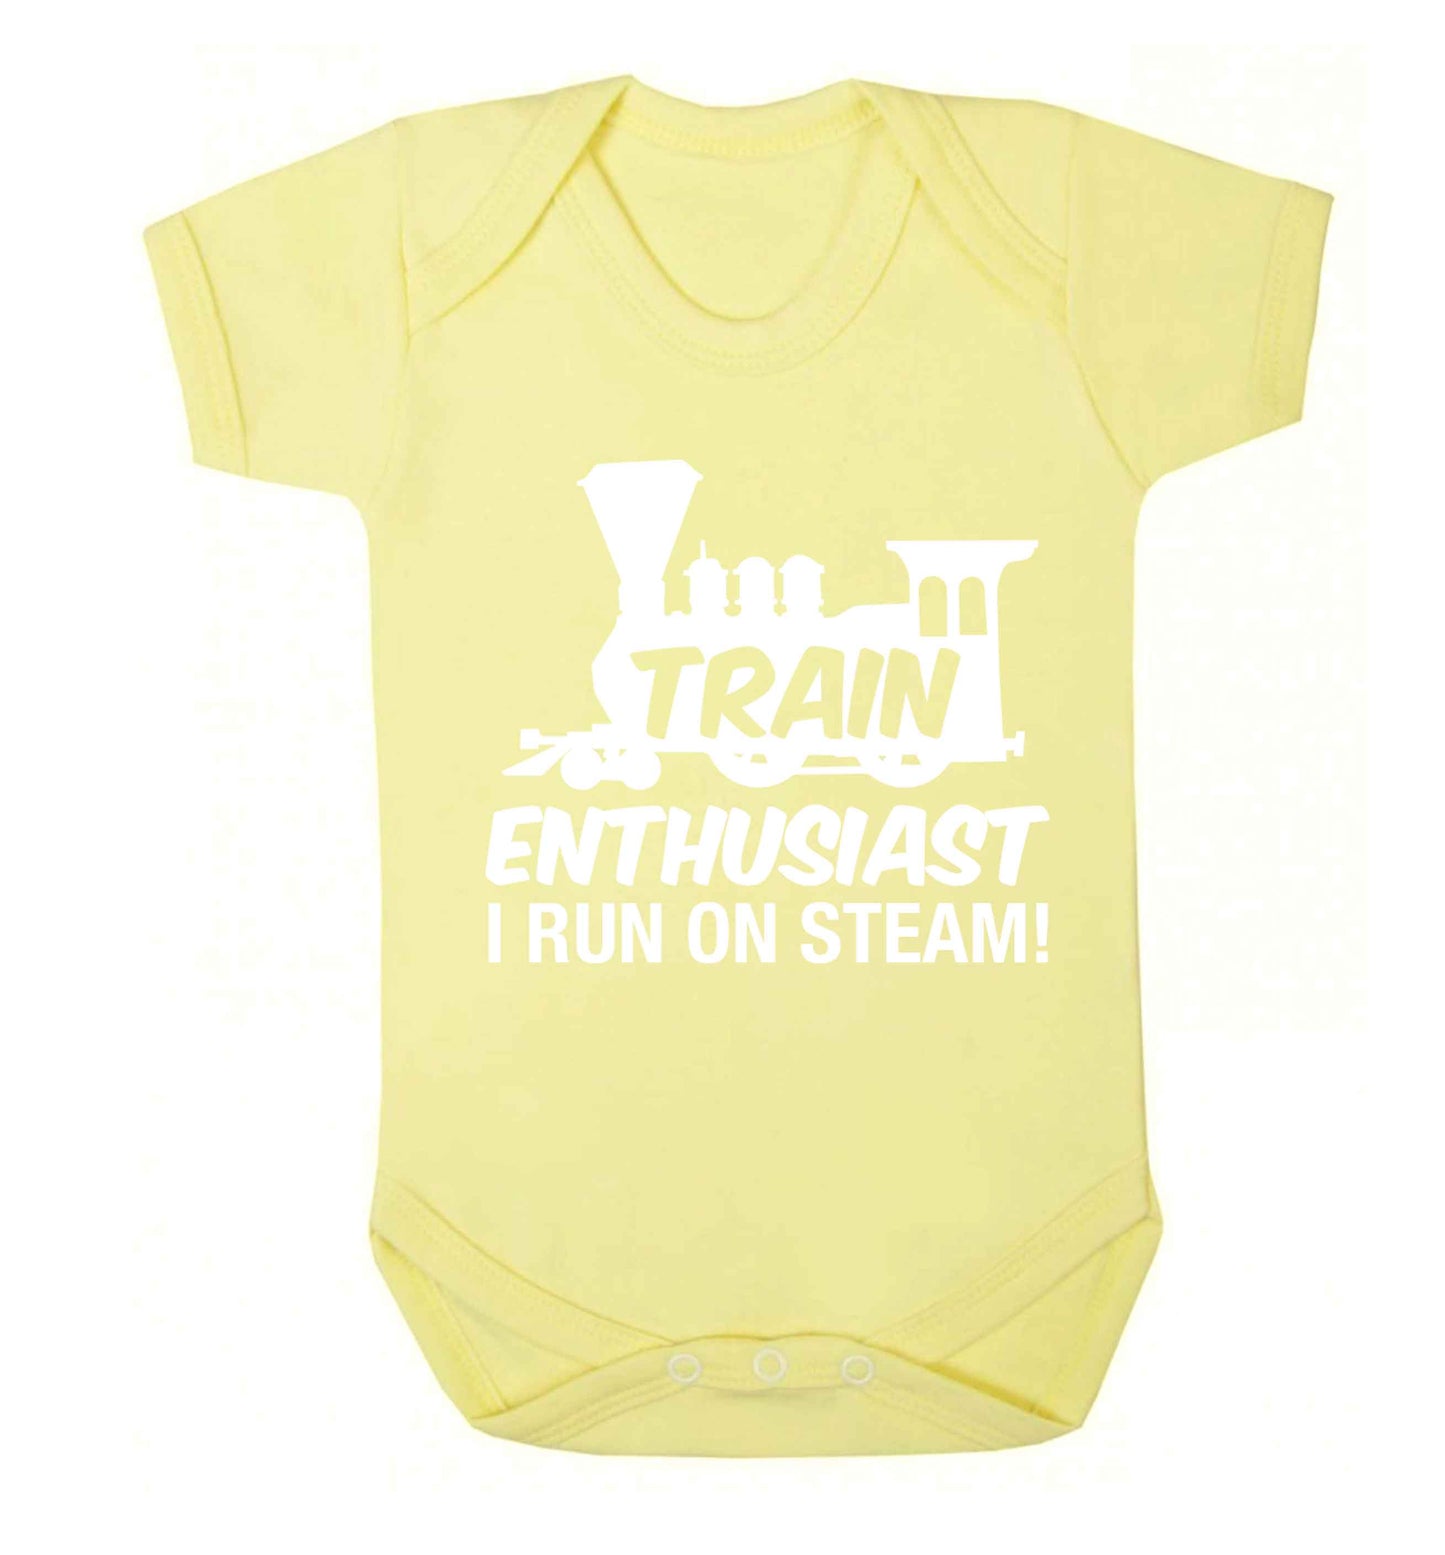 Train enthusiast I run on steam Baby Vest pale yellow 18-24 months